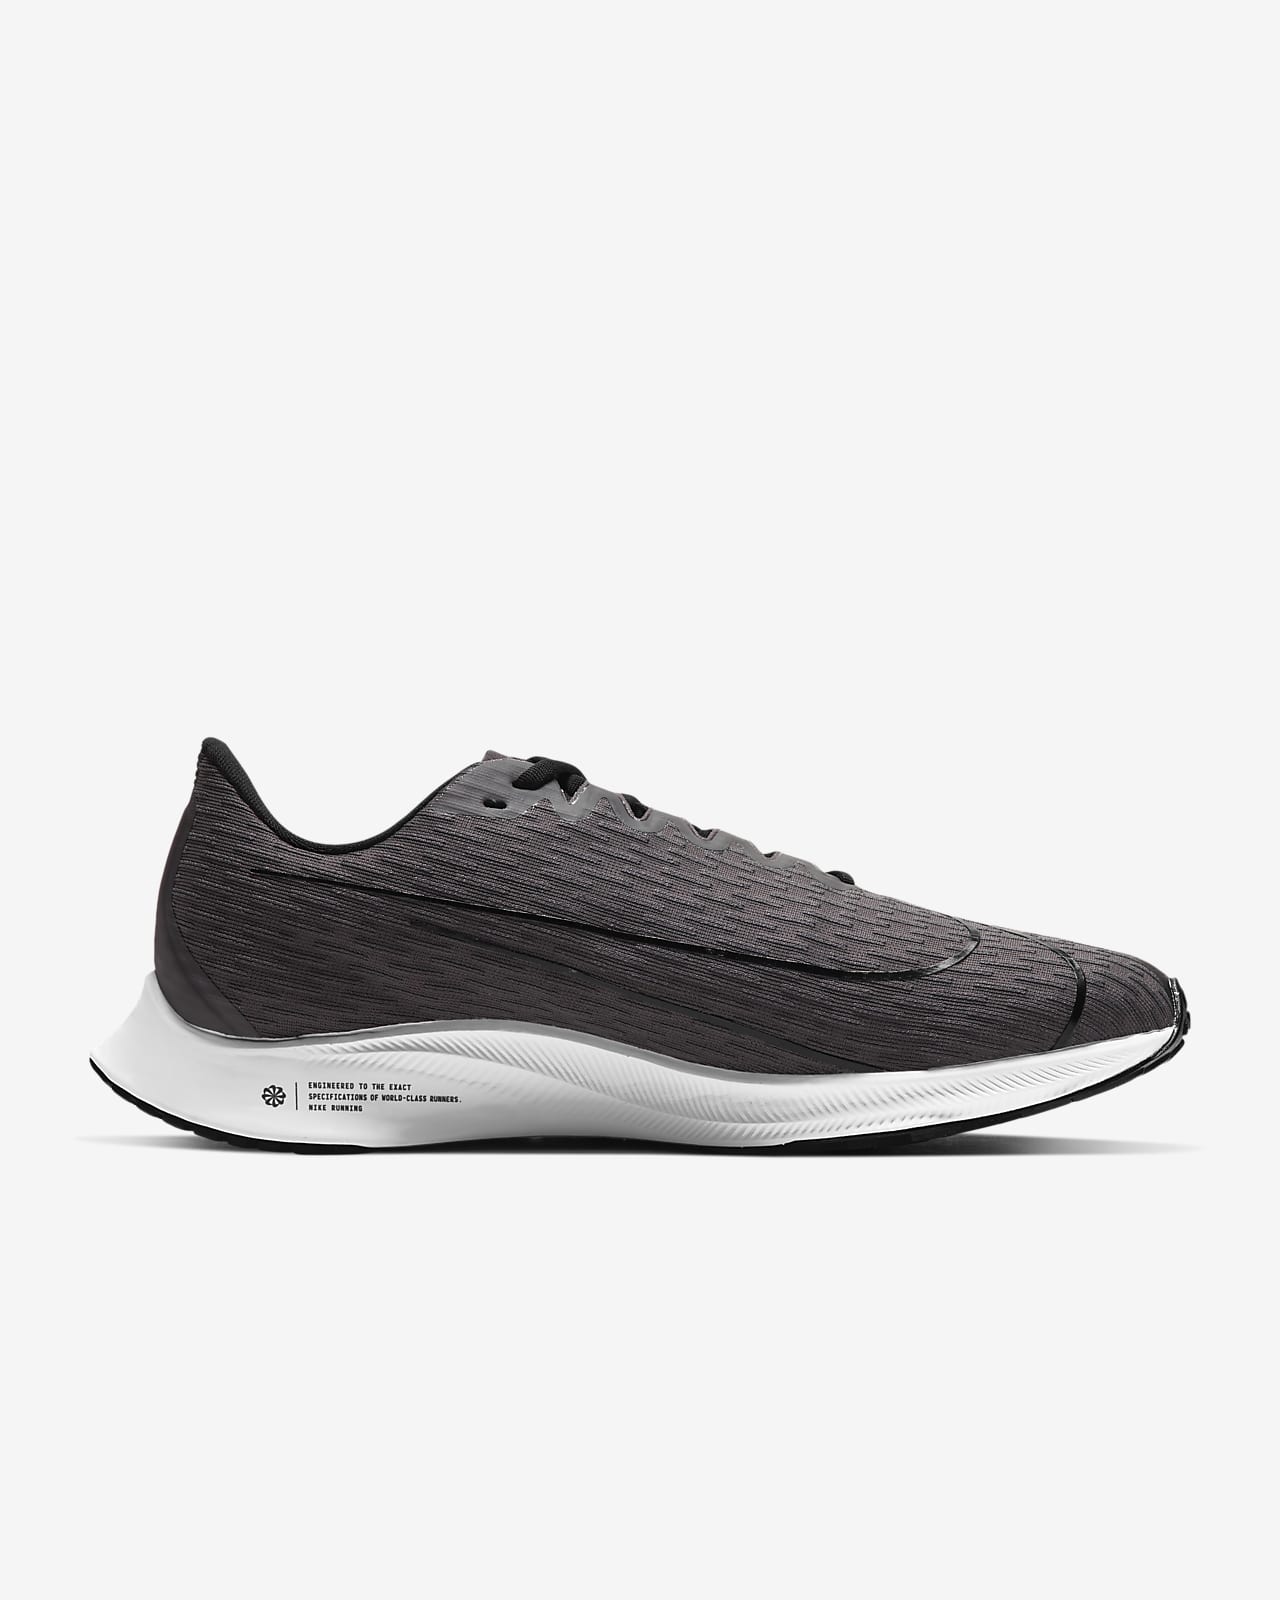 nike zoom fly rival 2